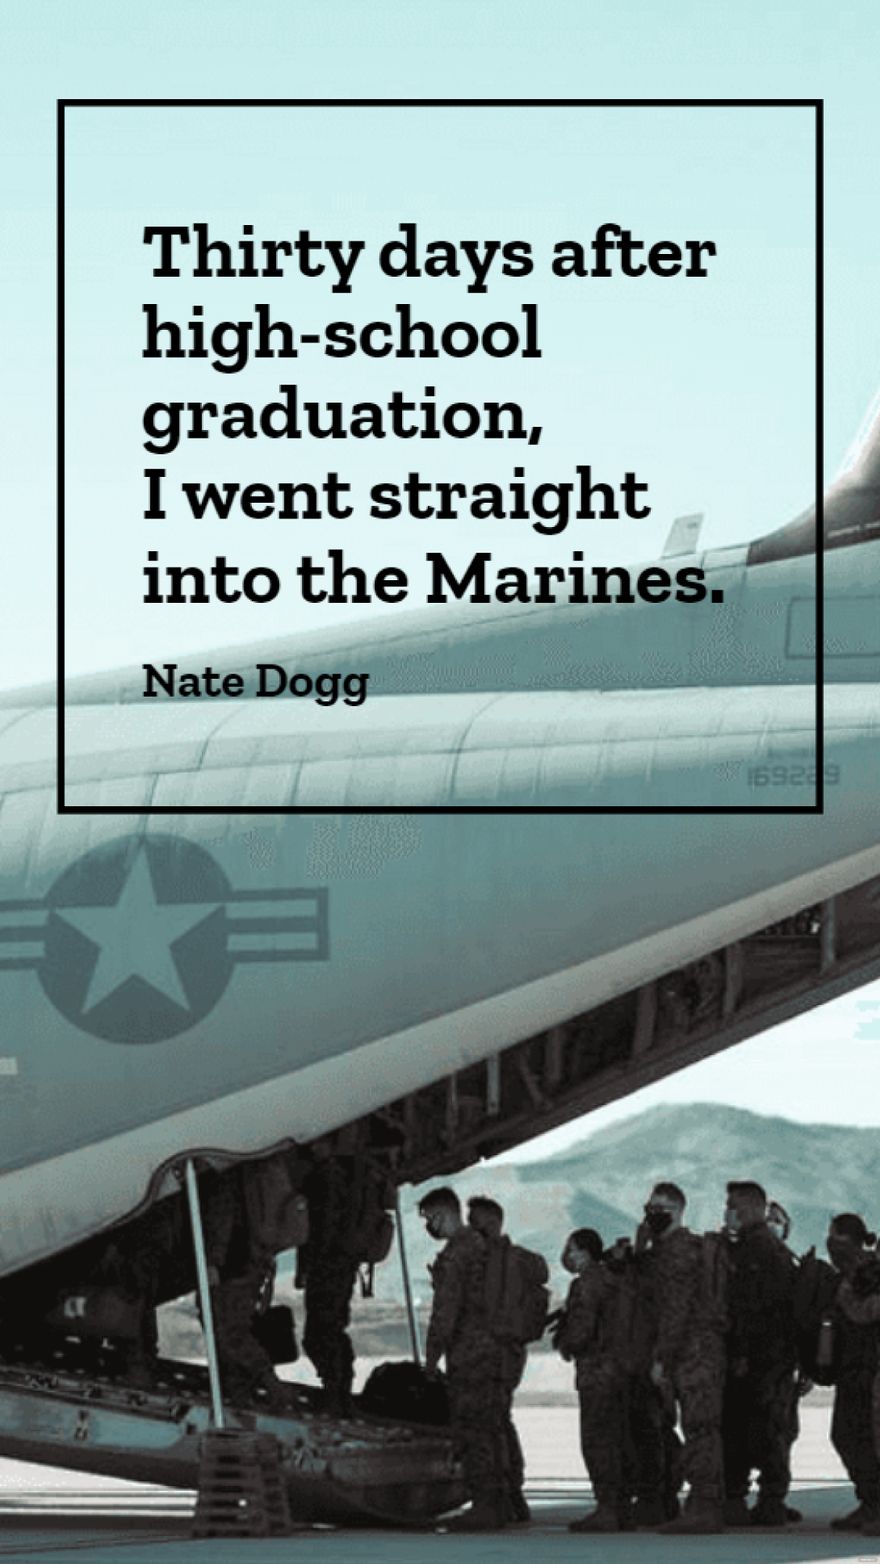 Free Nate Dogg - Thirty days after high-school graduation, I went straight into the Marines.